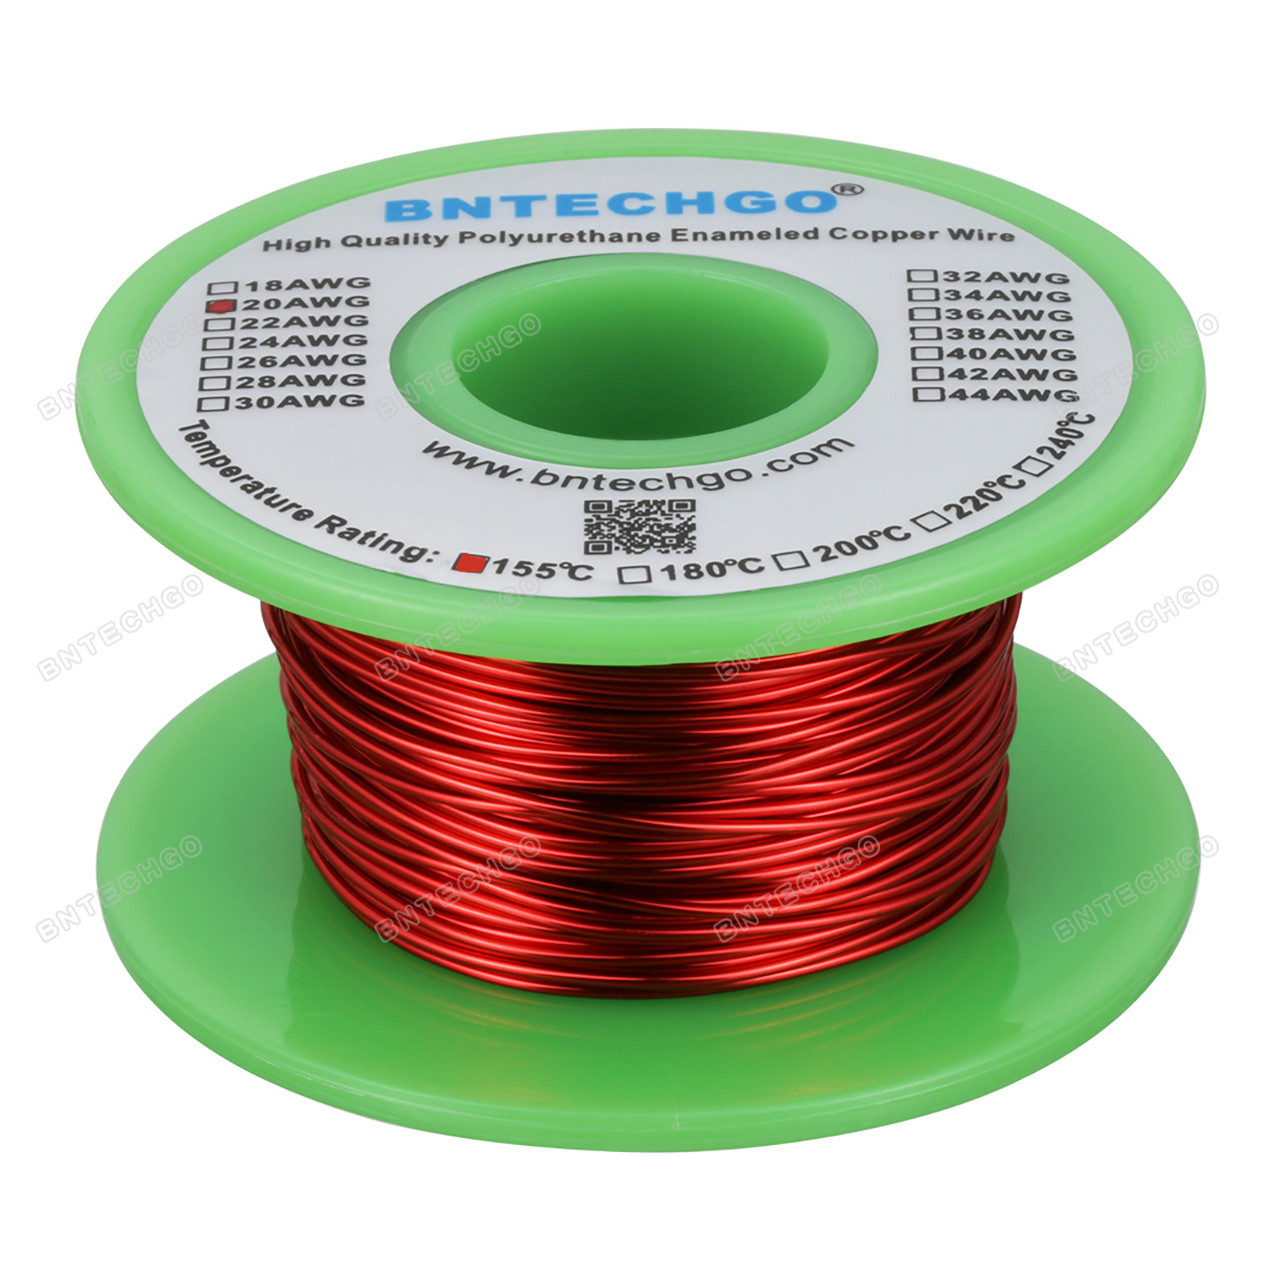 BNTECHGO 20 AWG Magnet Wire - Enameled Copper Wire - Enameled Magnet  Winding Wire - 4 oz - 0.0315 Diameter 1 Spool Coil Red Temperature Rating  155